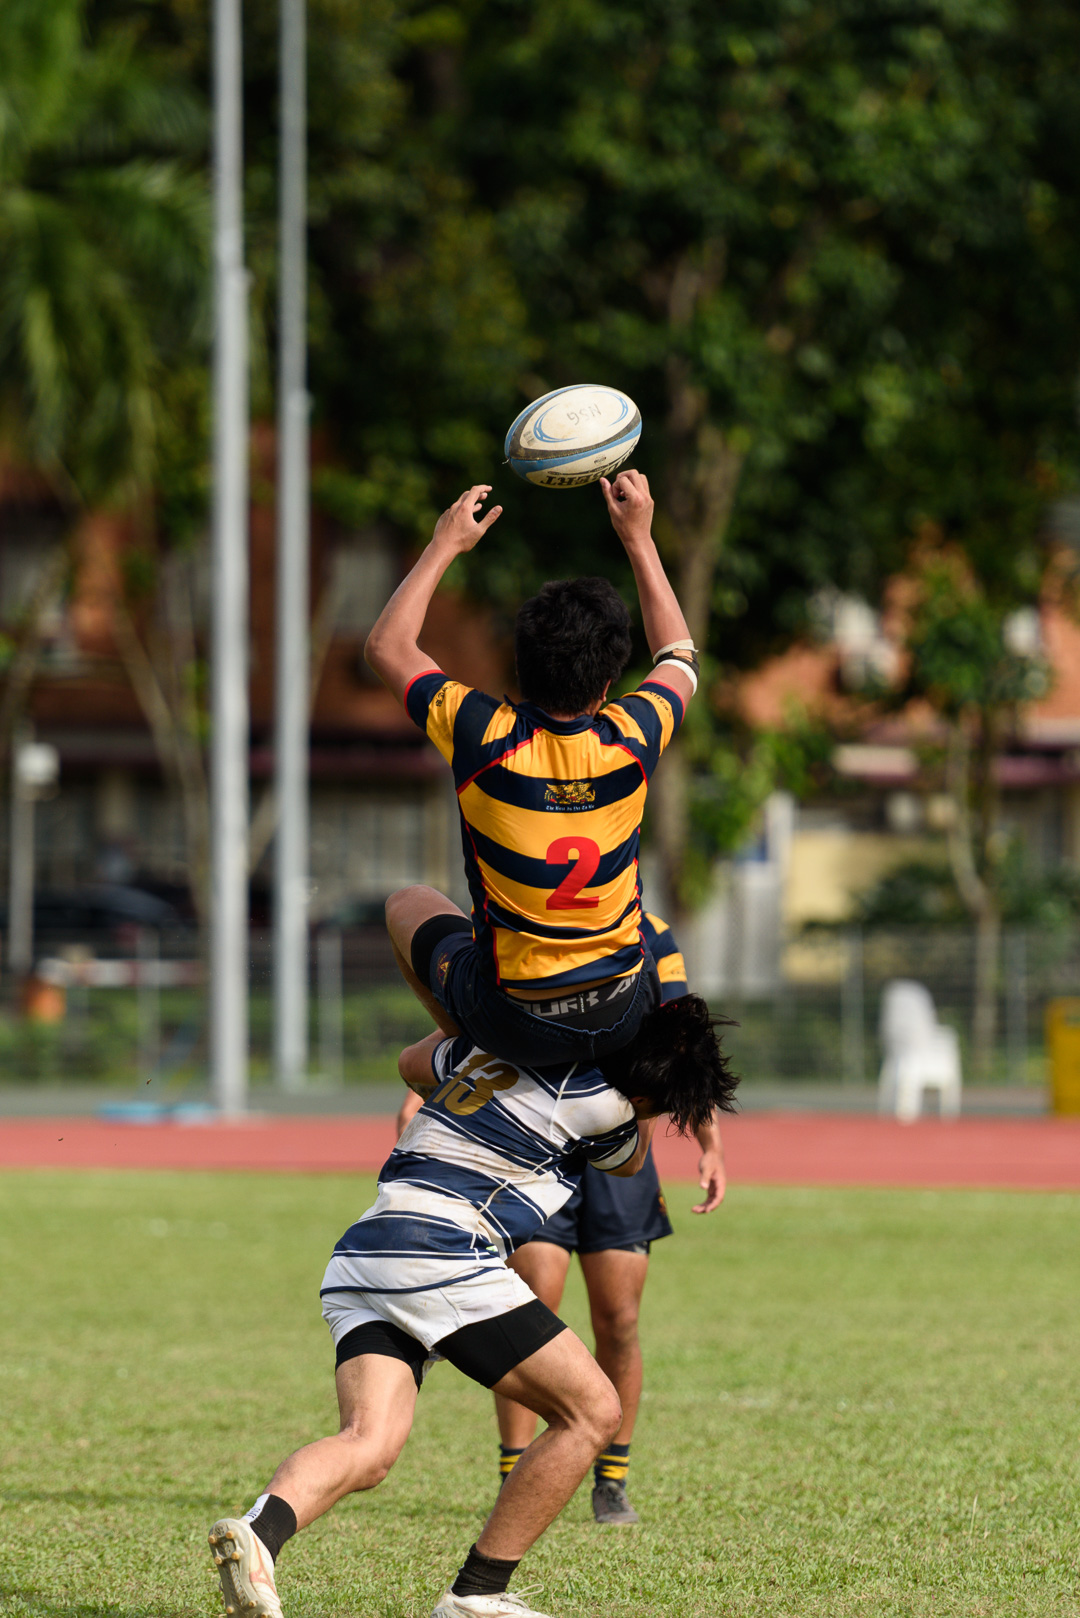 Xavier Goh (AC #2) is tackled in the air by Jeremy Tan (SA #13). (Photo 13 © Jared Chow/Red Sports)